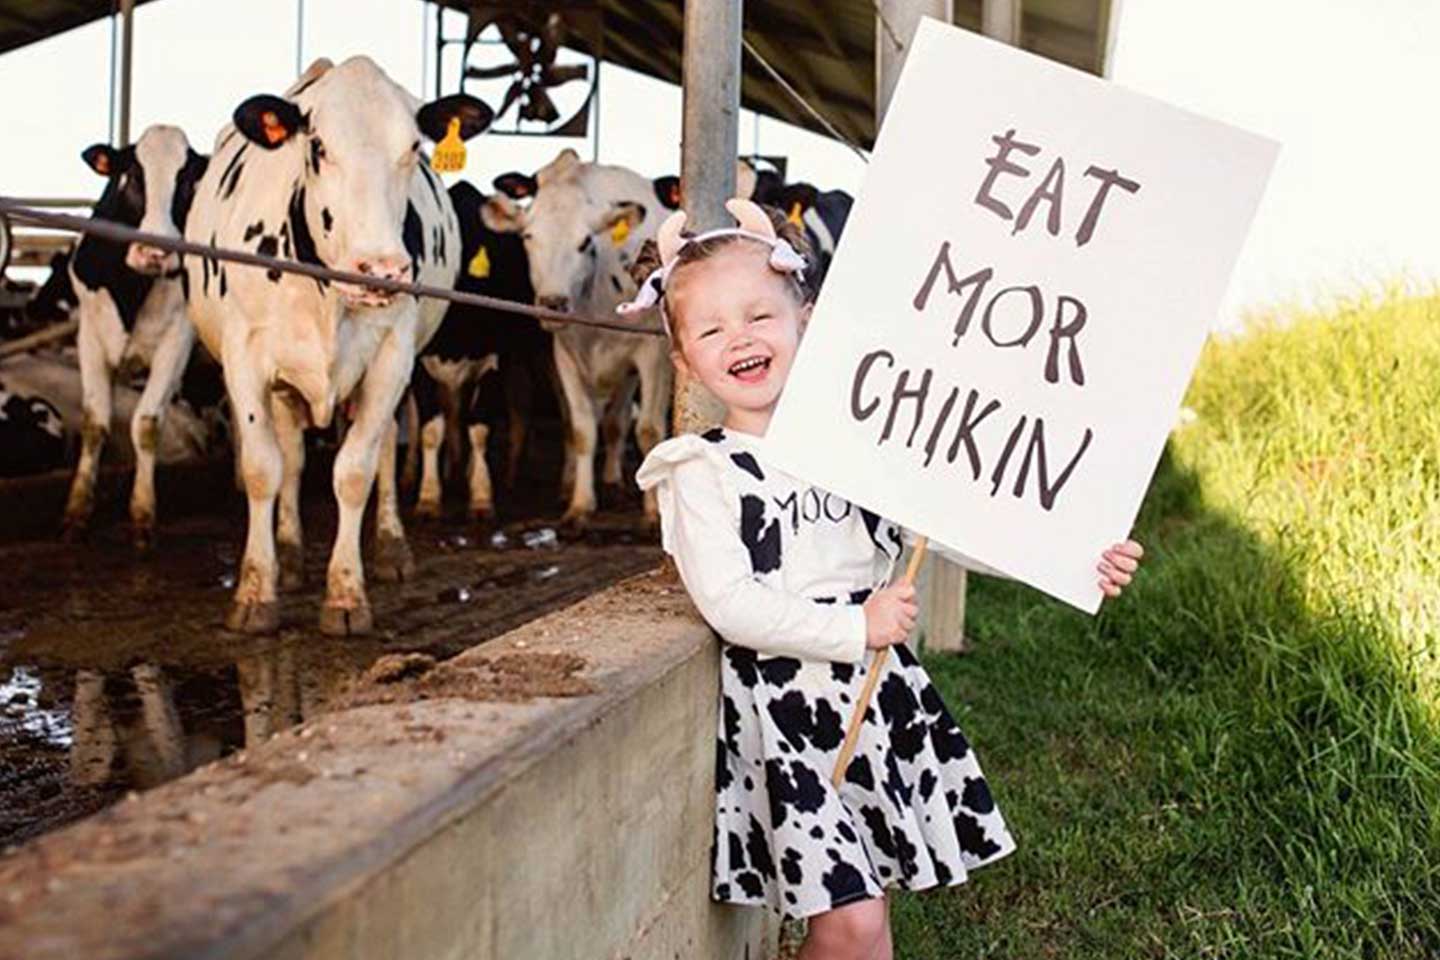 8 ways families celebrated their kids' birthdays with Chick-fil-A